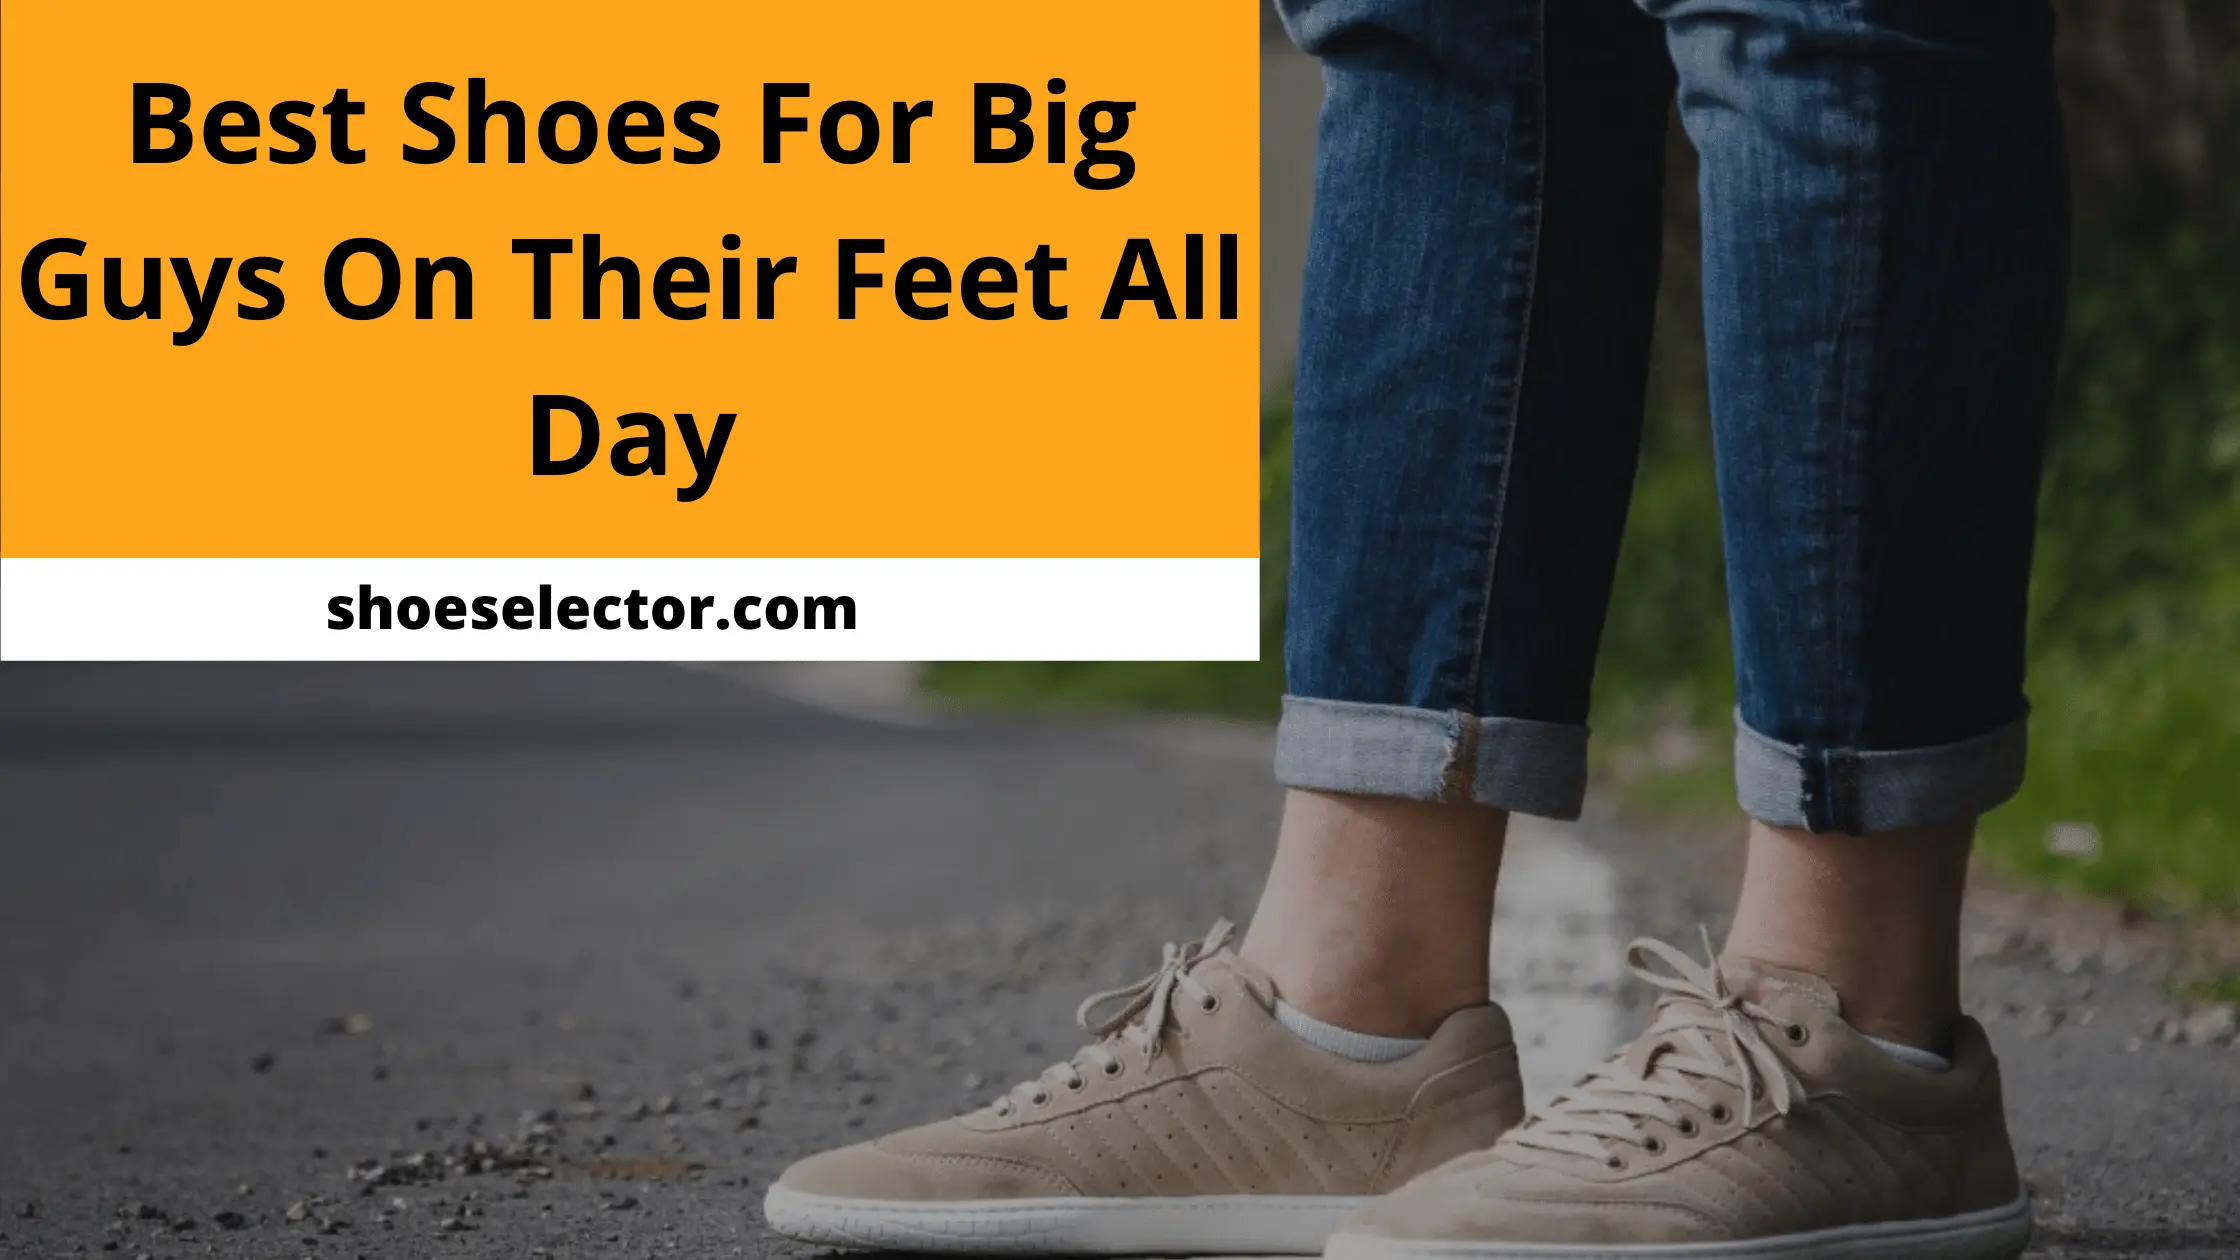 Best Shoes For Big Guys On Their Feet All Day | Buying Guides